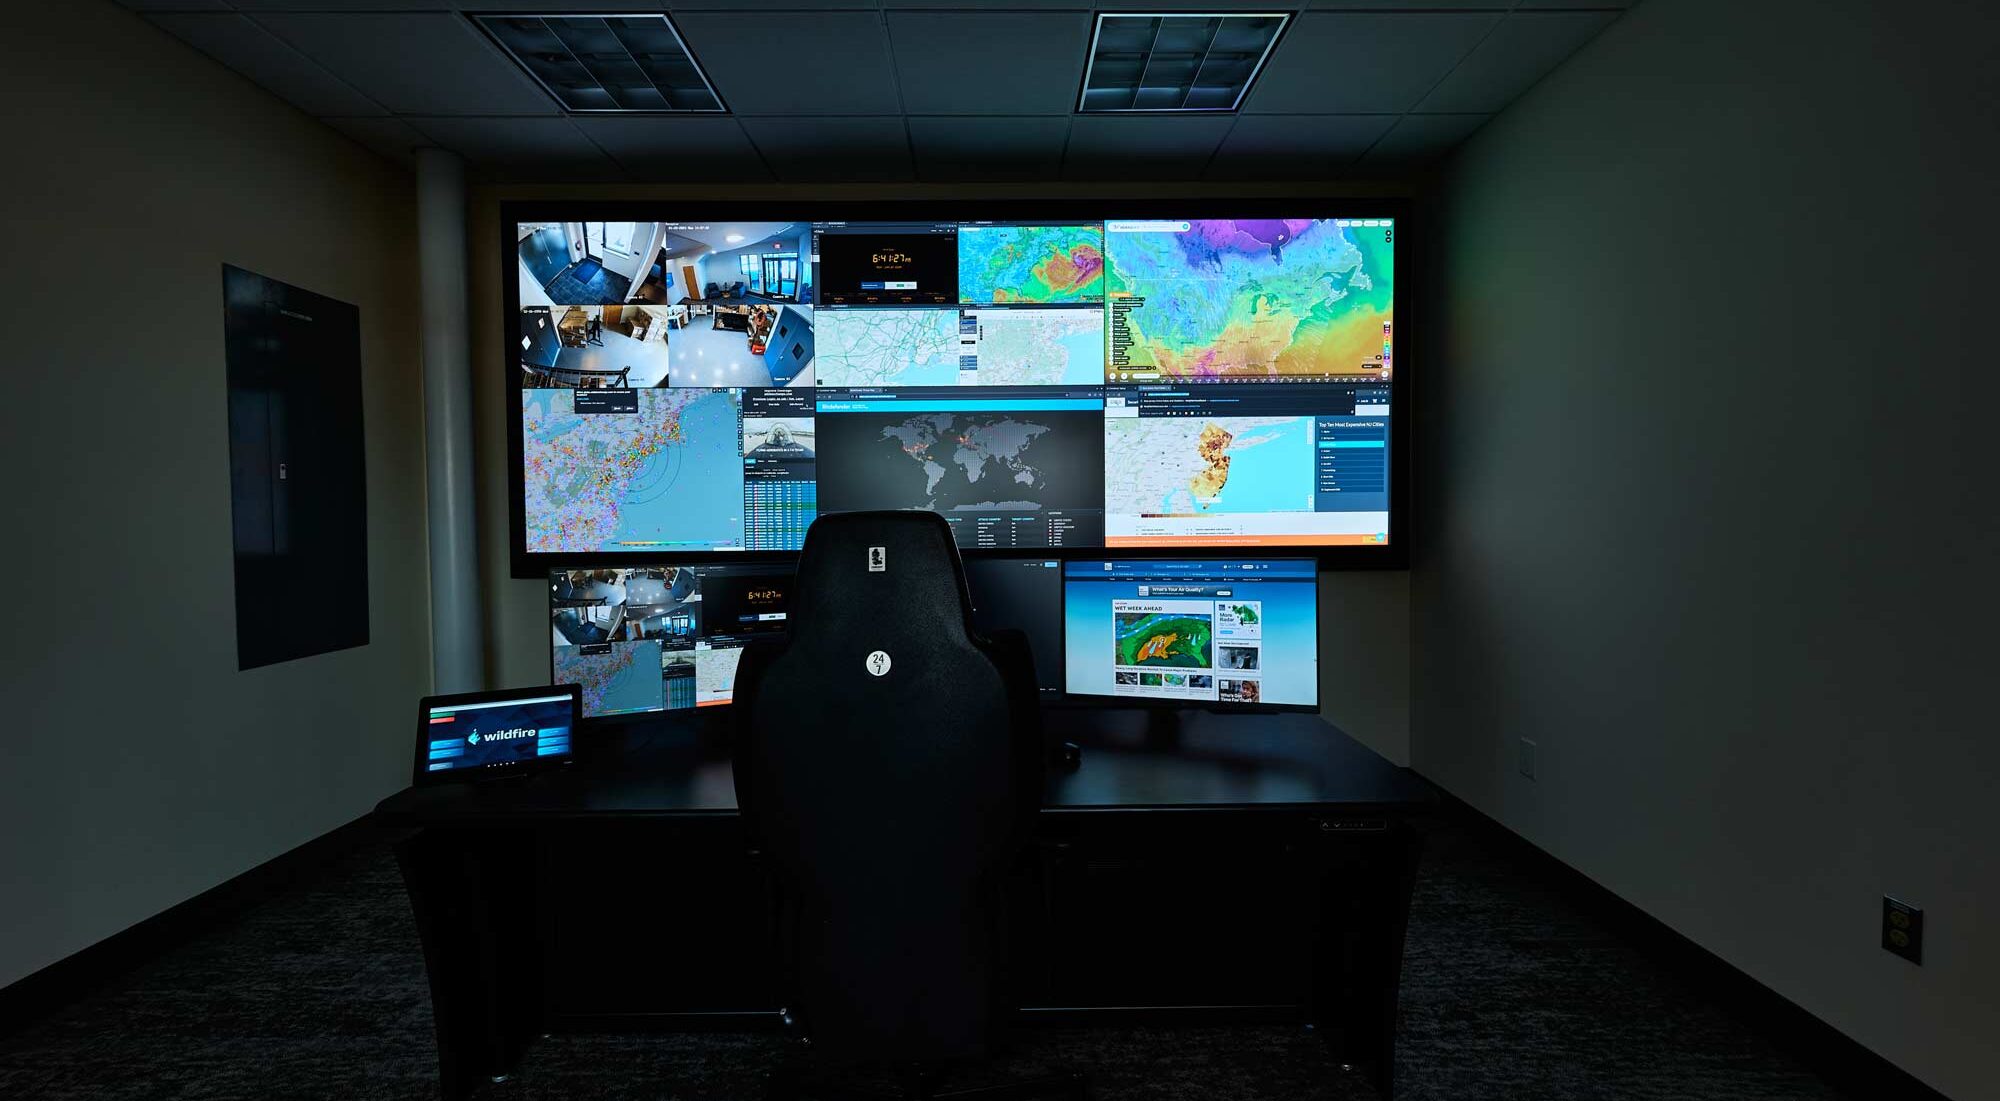 A control room with multiple screens displaying interfaces.